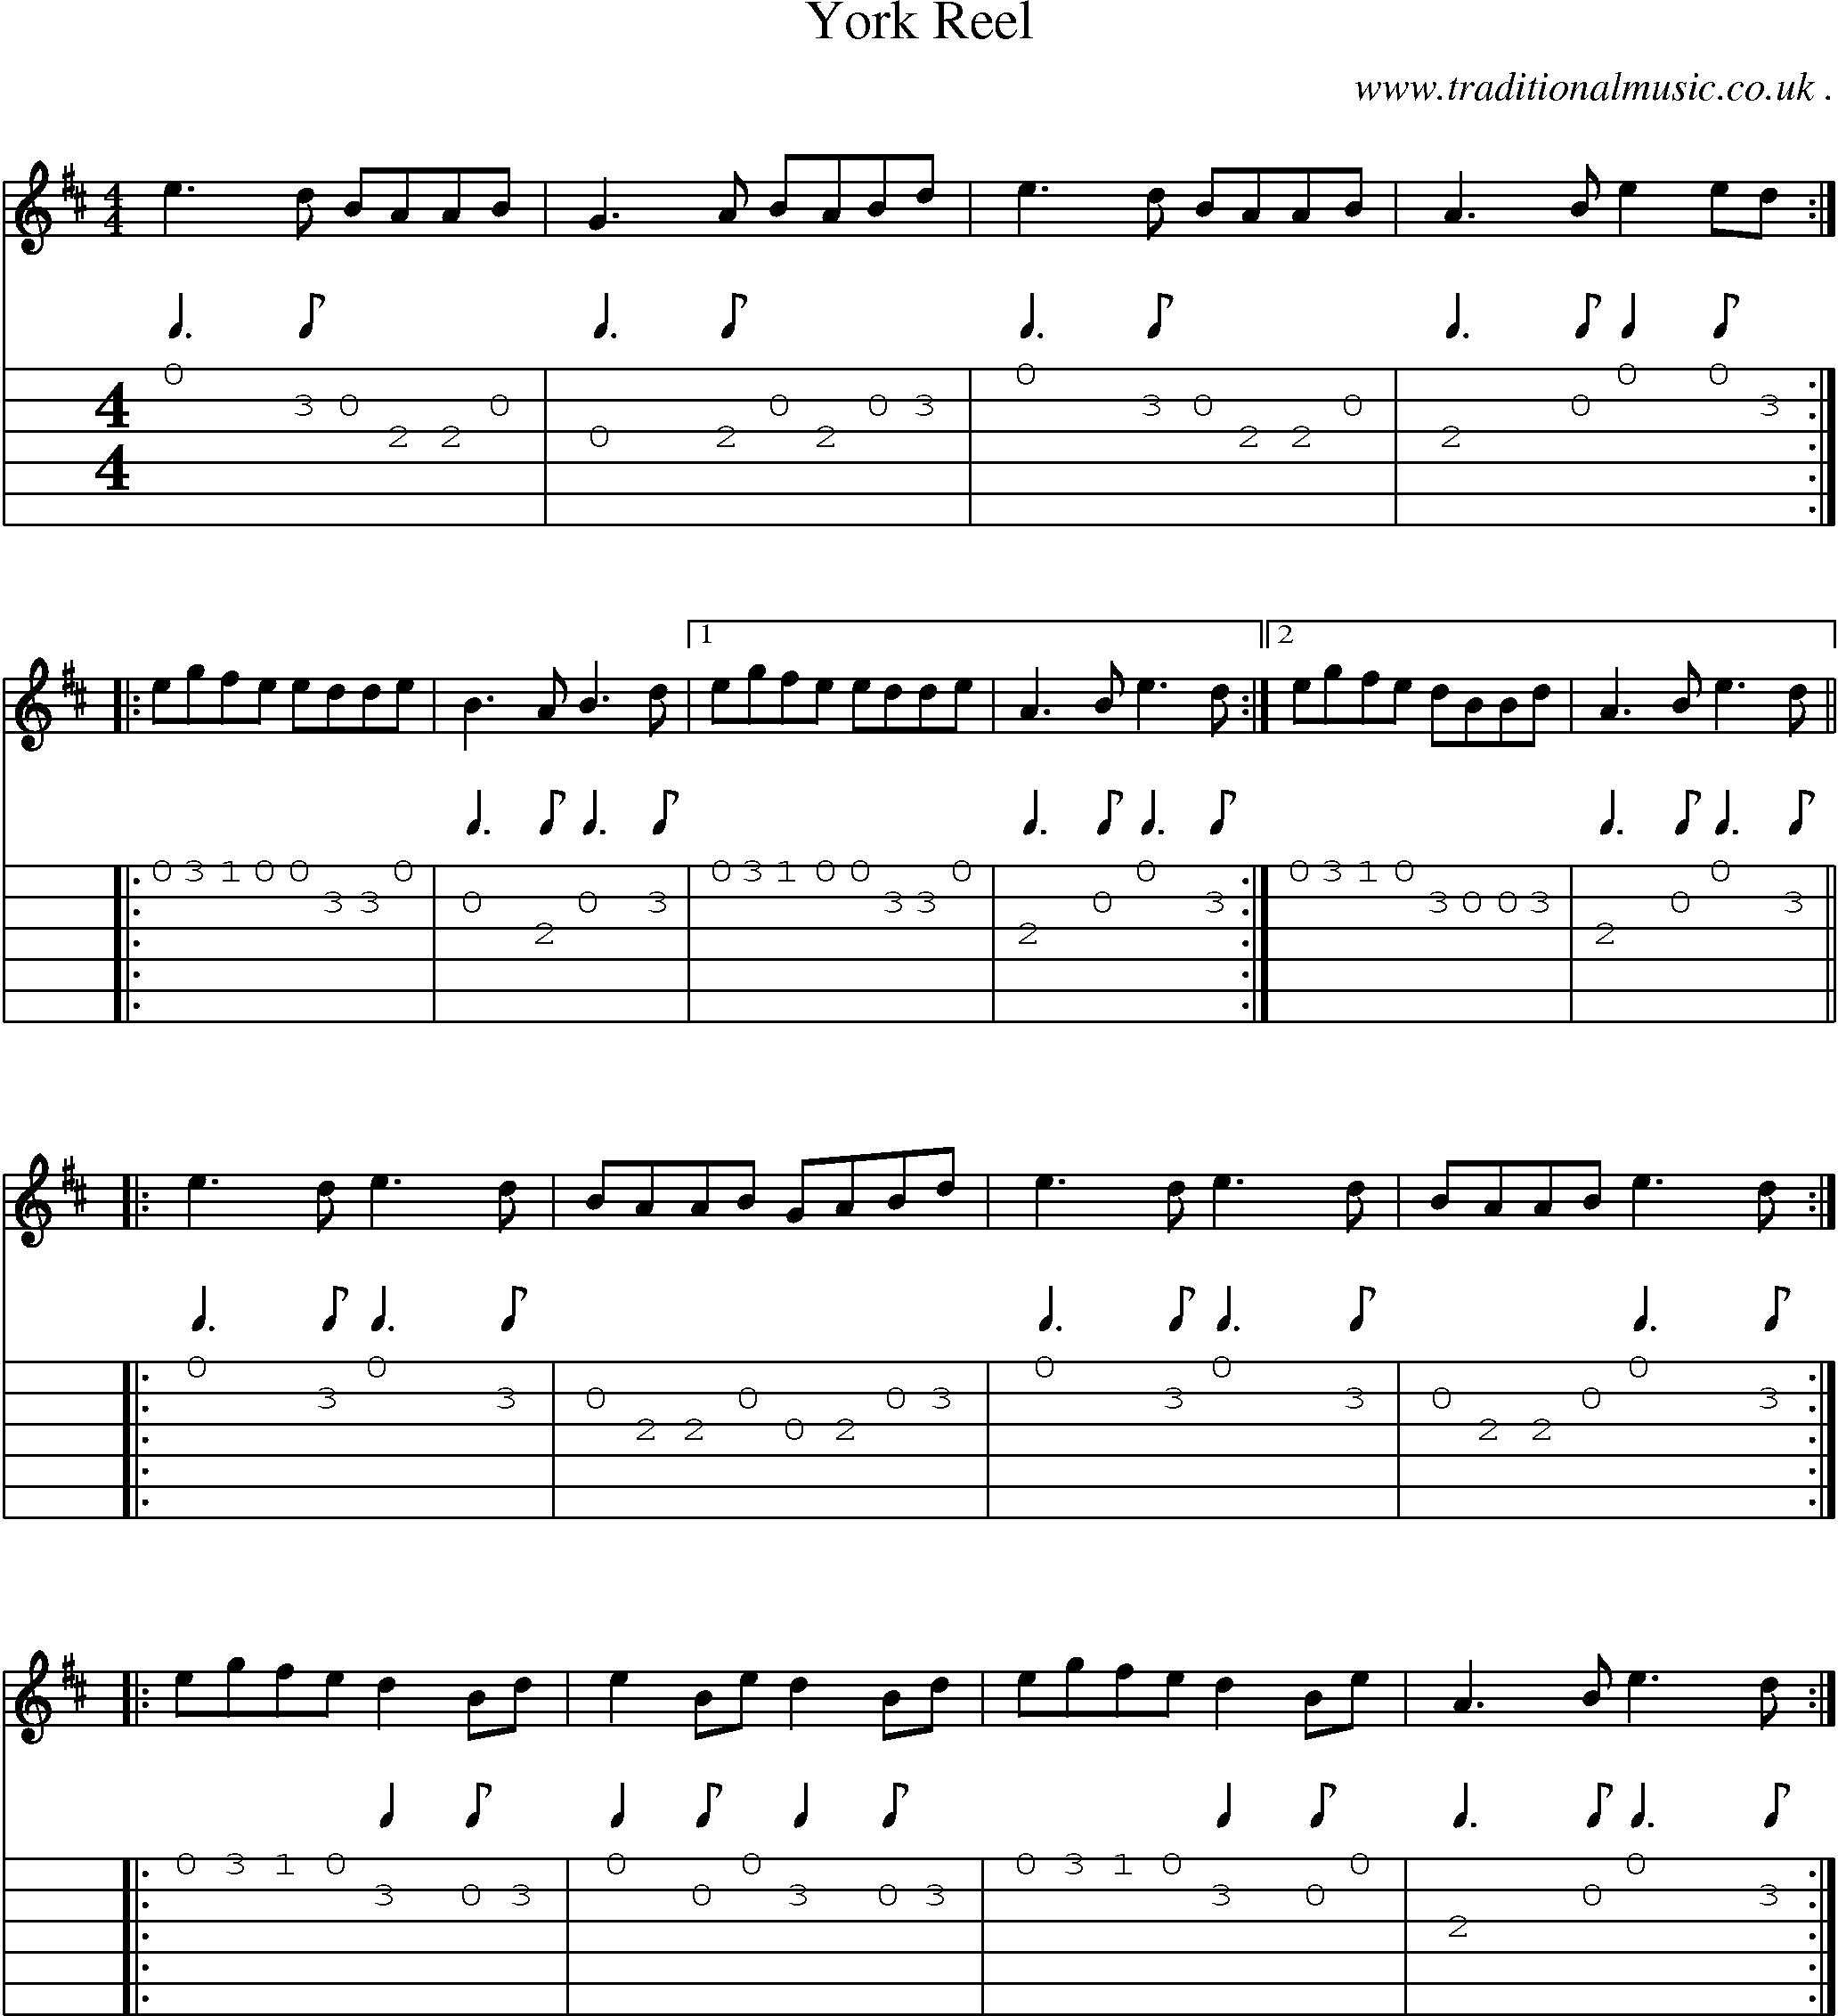 Sheet-Music and Guitar Tabs for York Reel